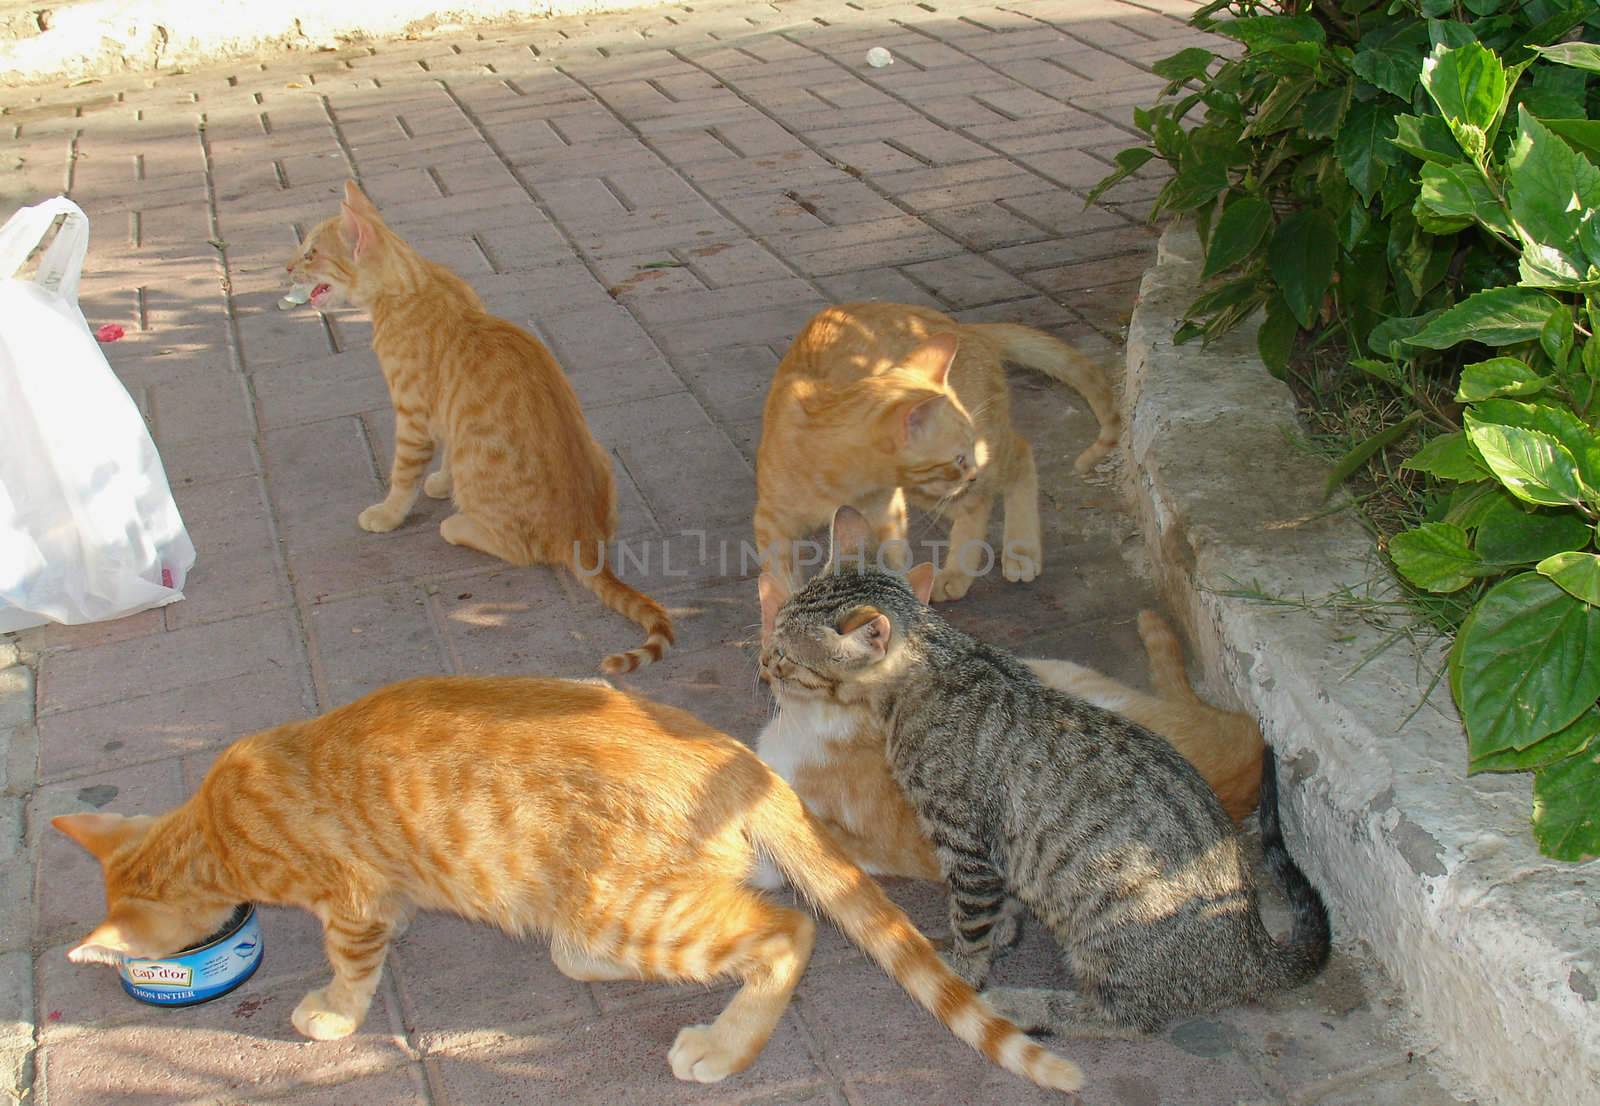  Wild cats on the streets of Sousse                               